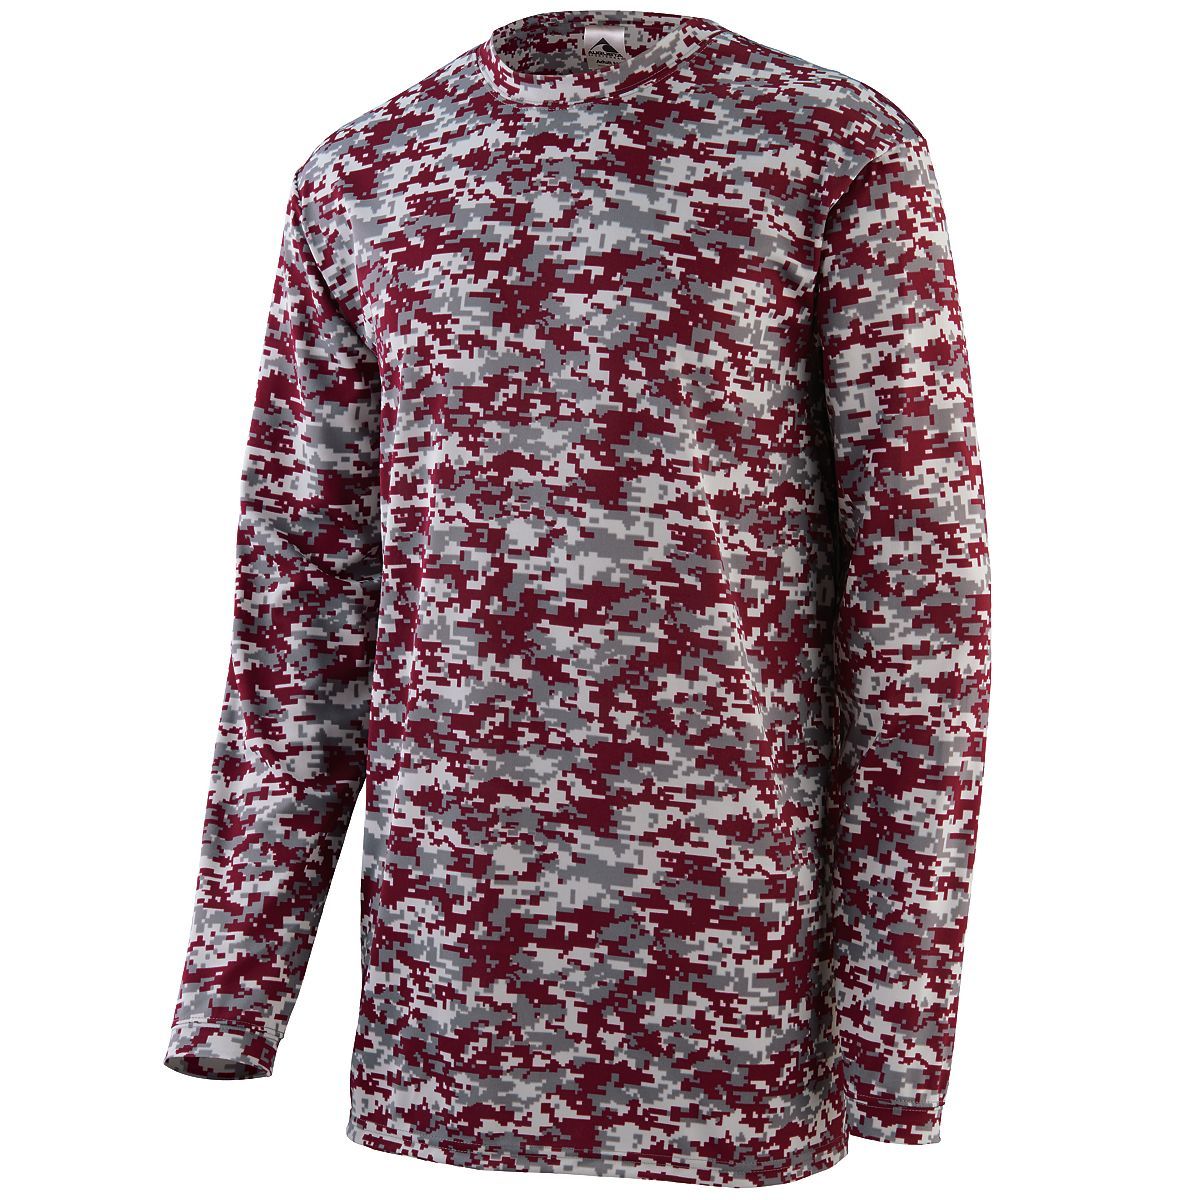 Augusta Sportswear Youth Digi Camo Wicking Long Sleeve T-Shirt in Maroon Digi  -Part of the Youth, Youth-Tee-Shirt, T-Shirts, Augusta-Products, Shirts product lines at KanaleyCreations.com